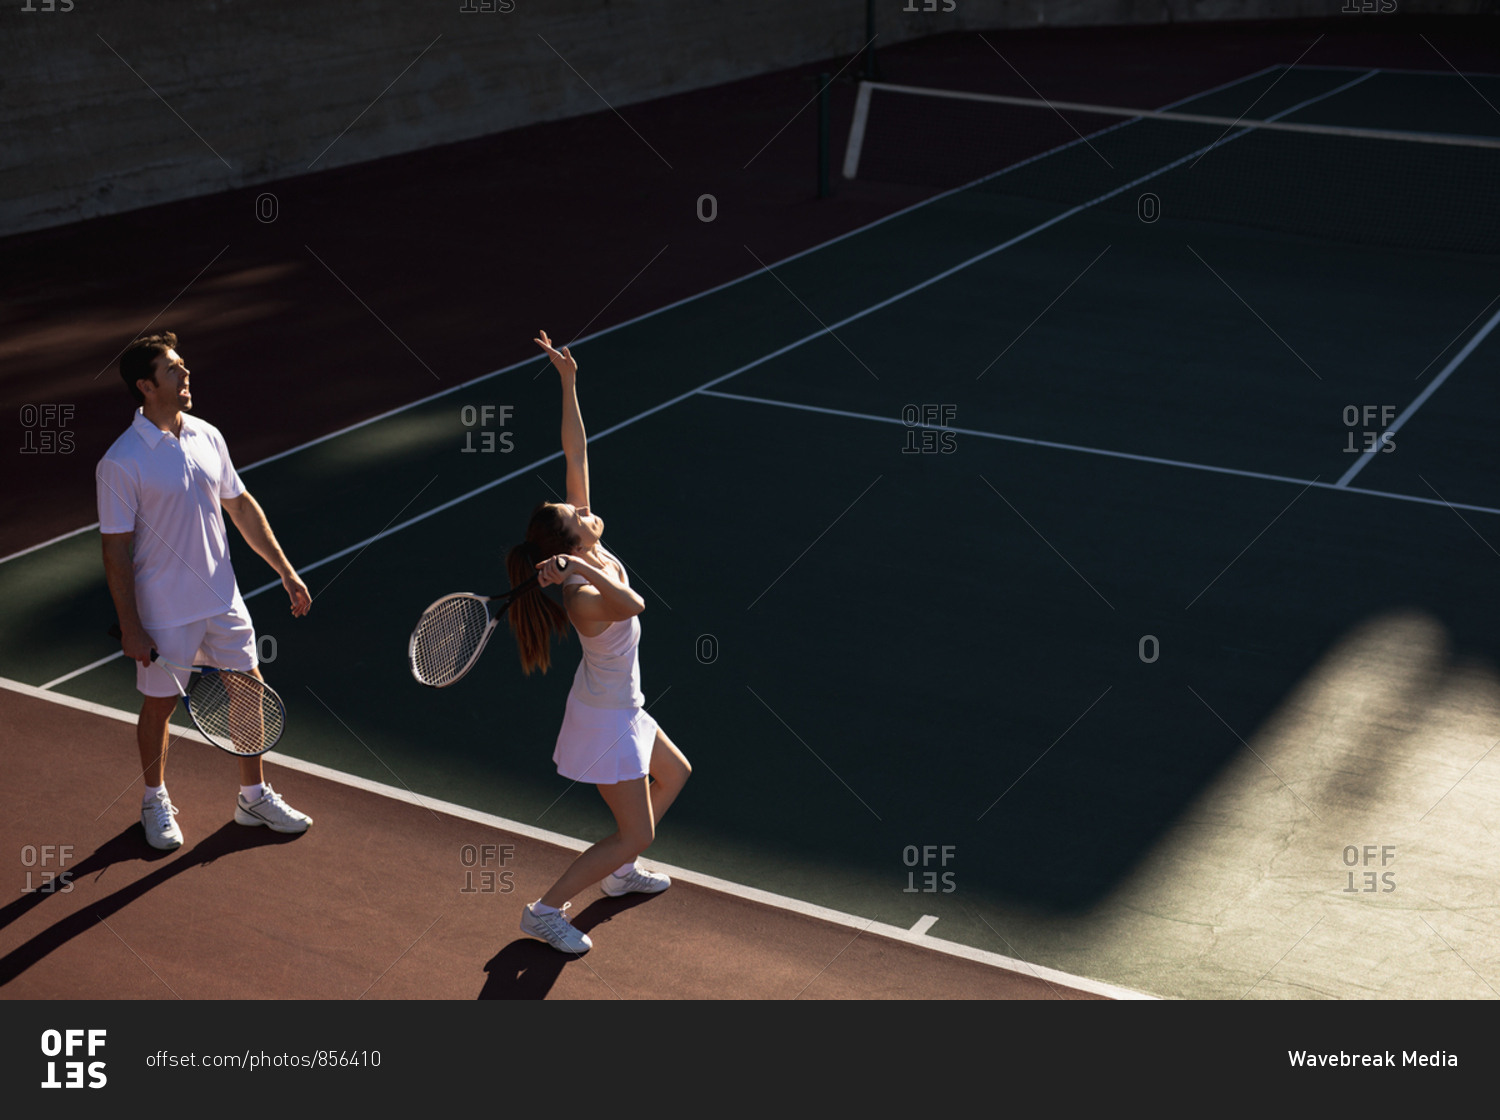 Side view of a young Caucasian woman and a man playing tennis on a sunny day, woman serving